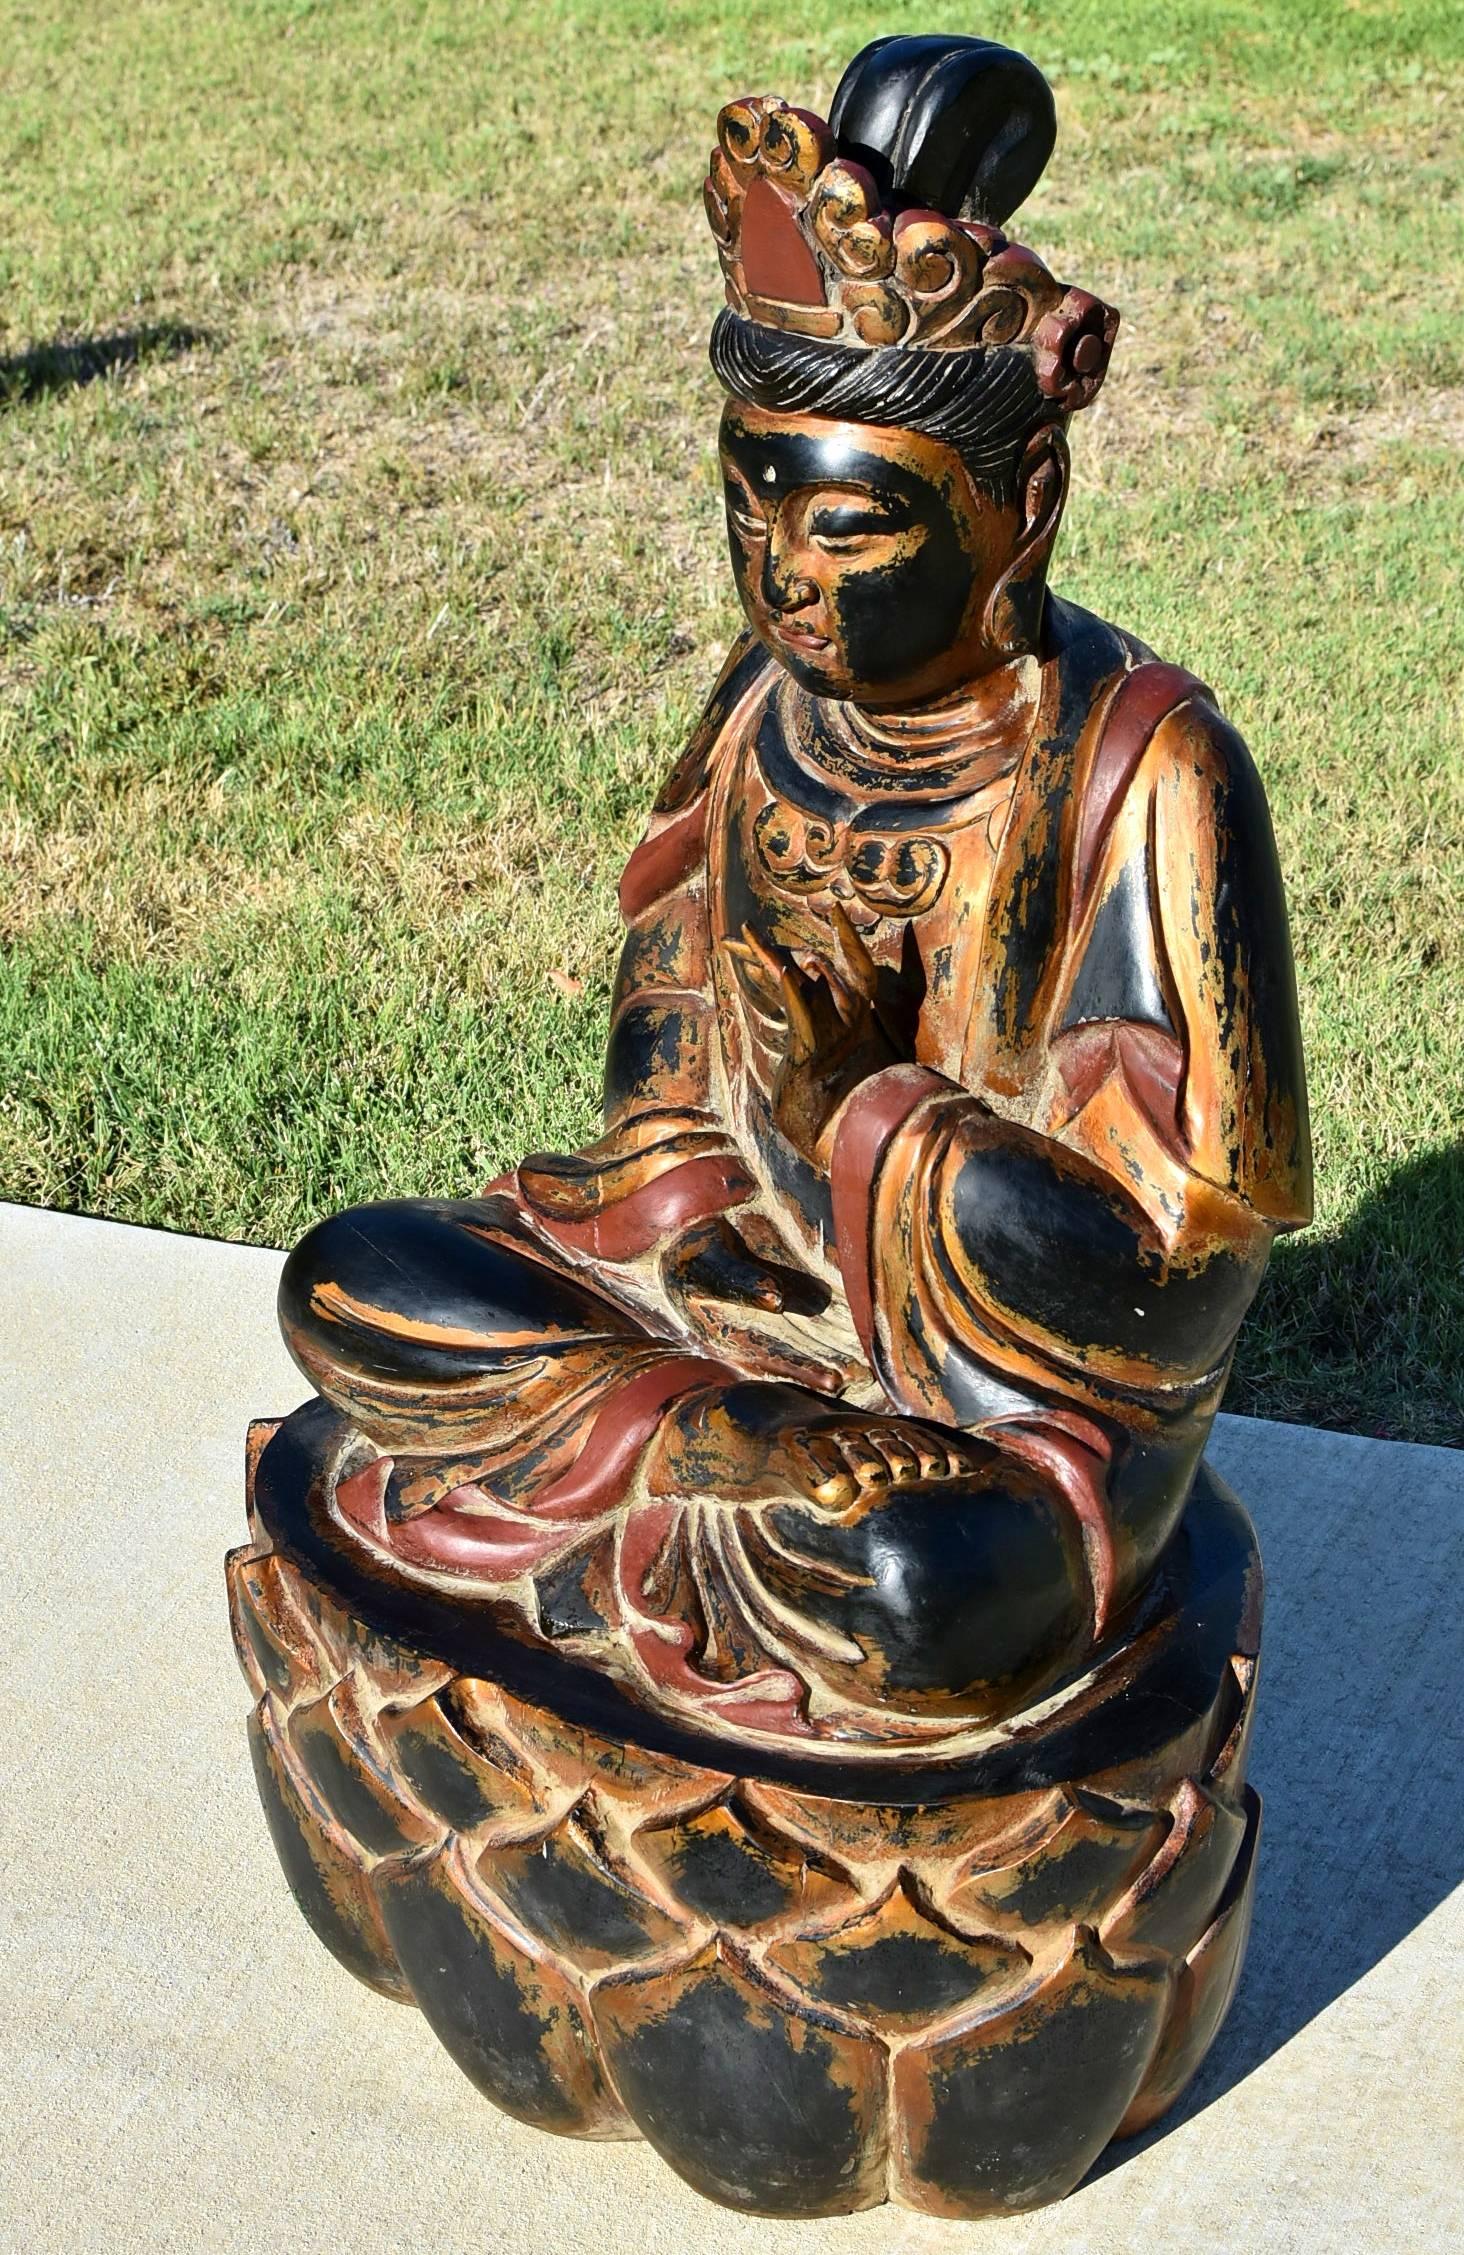 A beautiful solid wood Buddha statue. The Buddha is seated on a lotus throne. His face is serene and peaceful. The statue is of the Tang dynasty style, with a full and round face. Fingers are beautifully done as well as robe and crown.

This is a